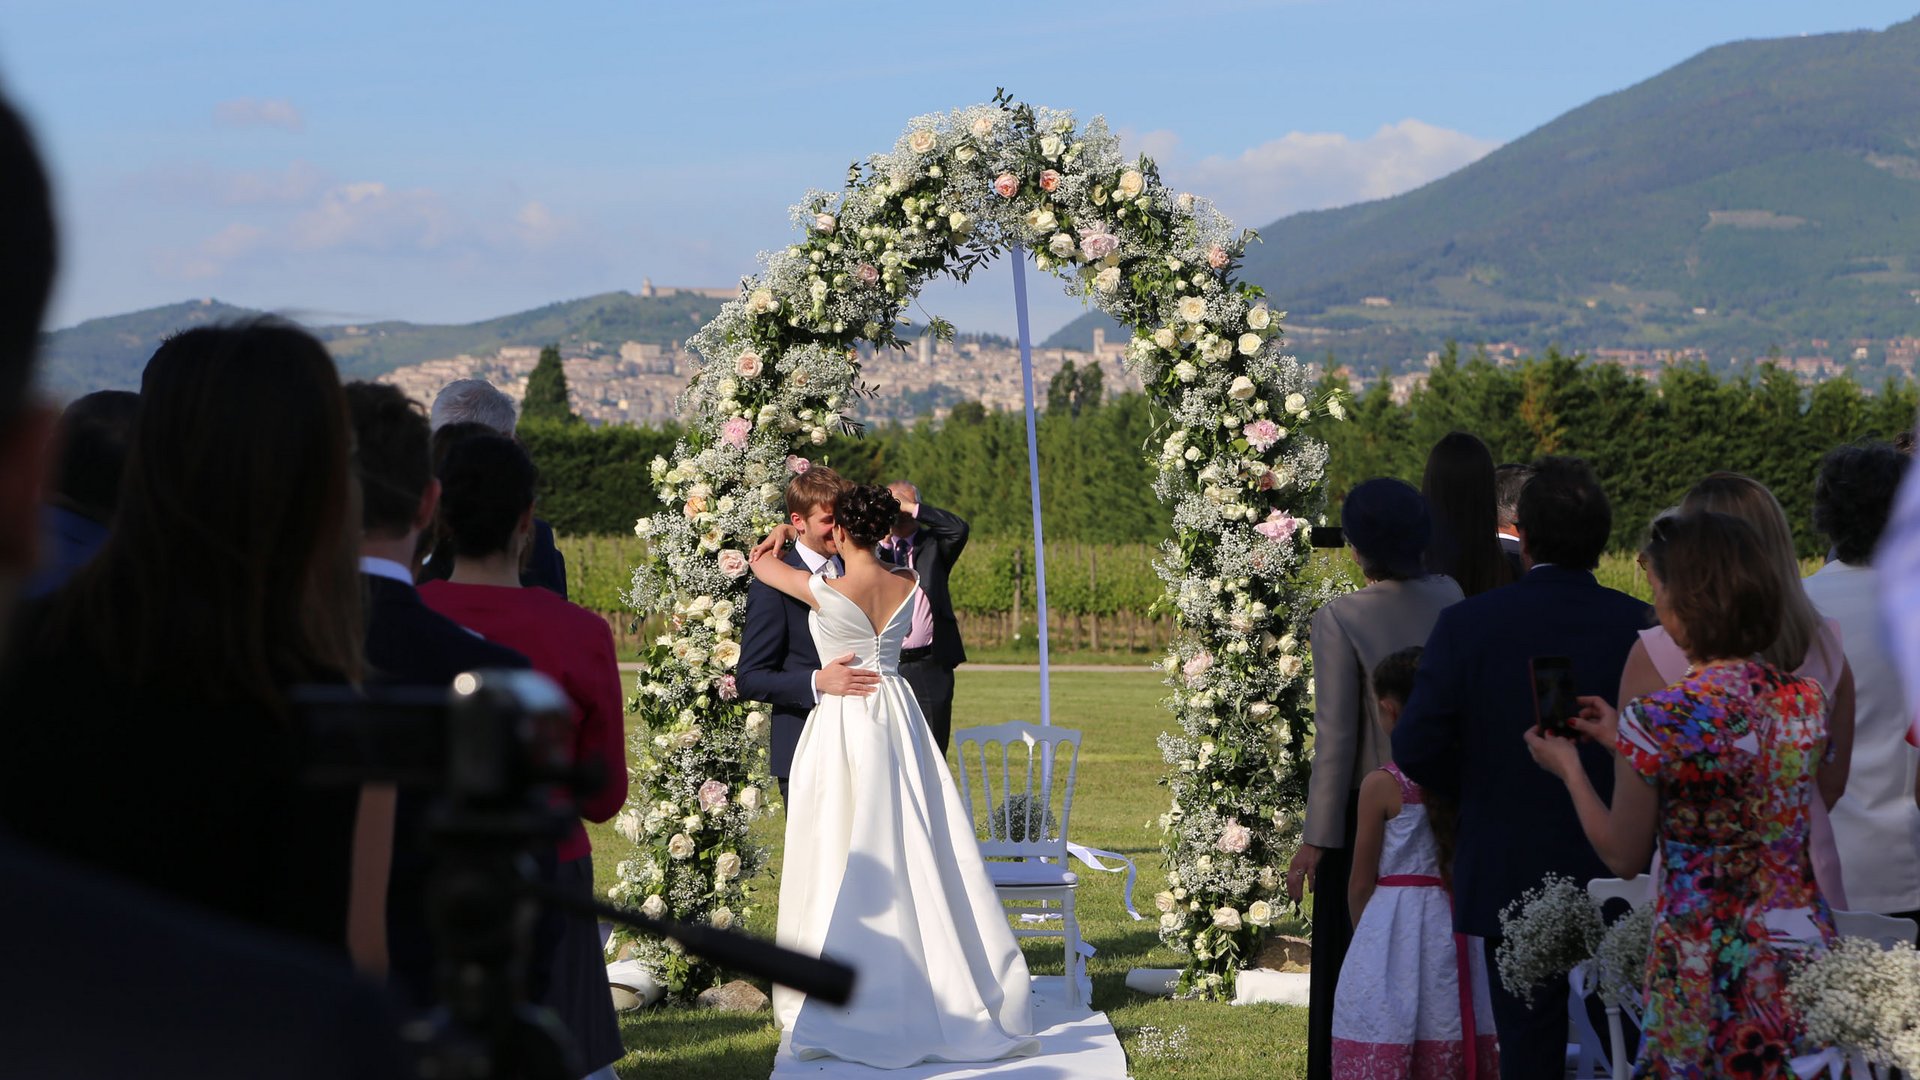 Valle di Assisi: a resort for weddings in Assisi